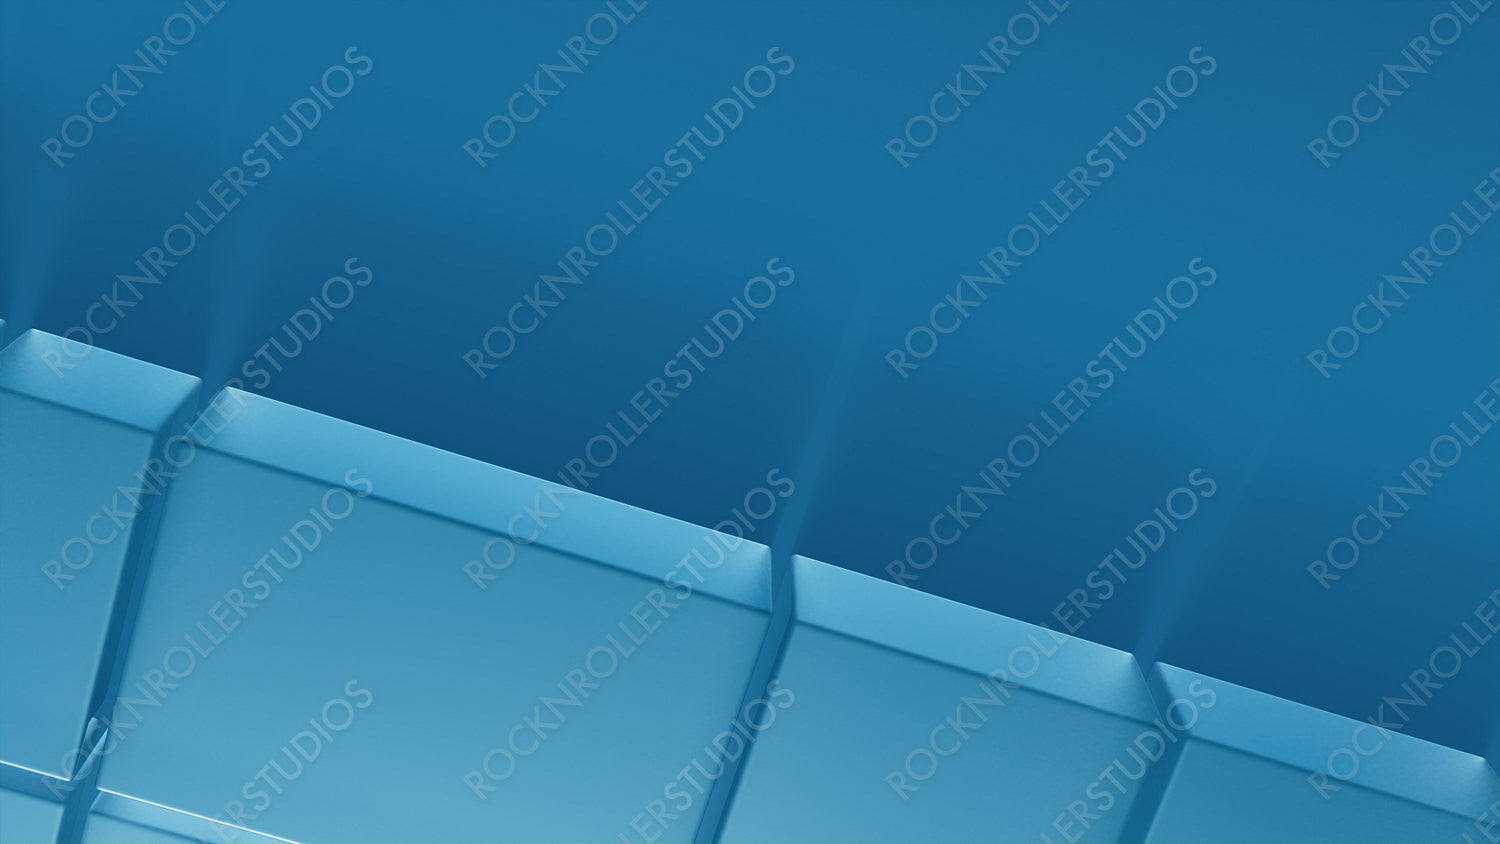 Acrylic Blocks on a Blue Surface. Innovative Tech Aesthetic with space for text. 3D Render.